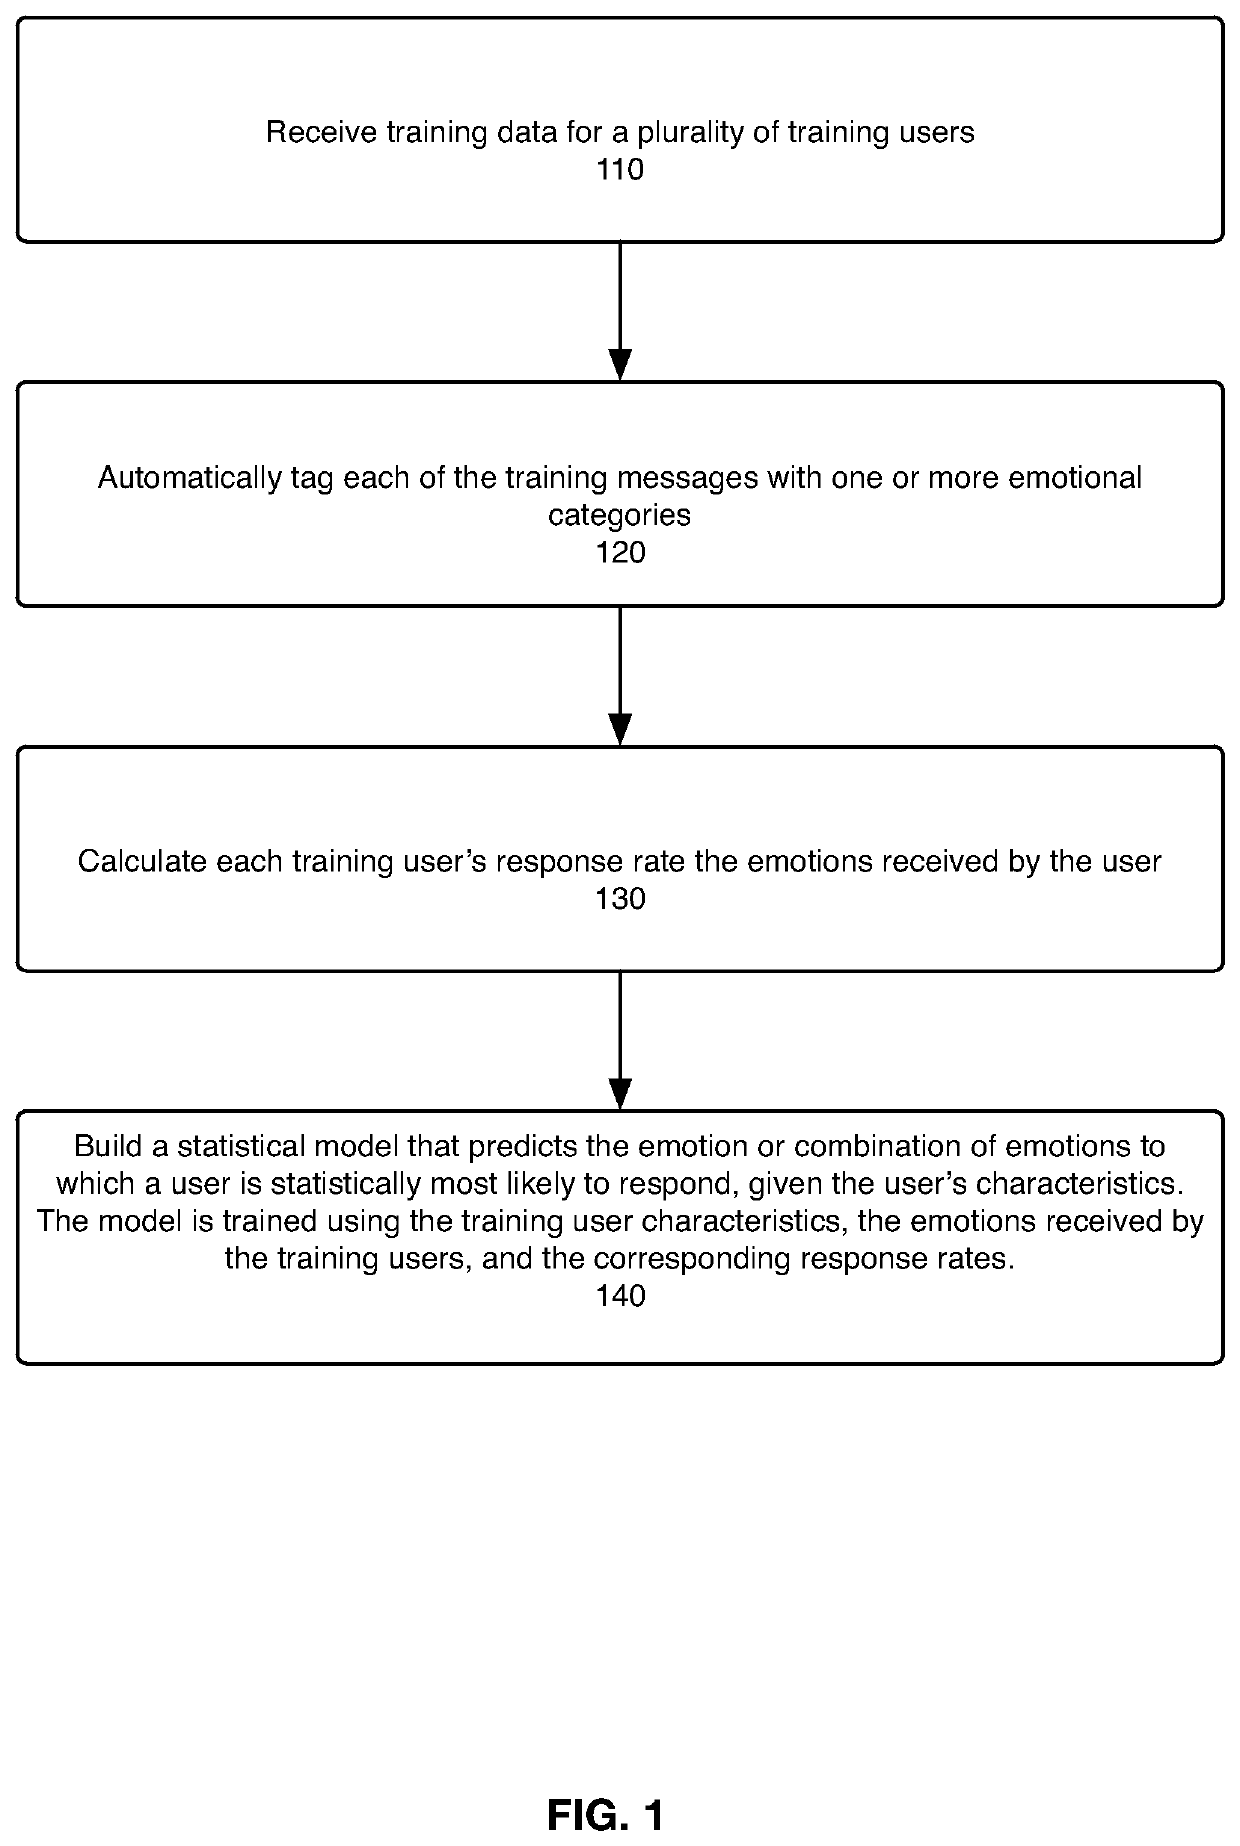 System, method, and computer program for providing an instance of a promotional message to a user based on a predicted emotional response corresponding to user characteristics